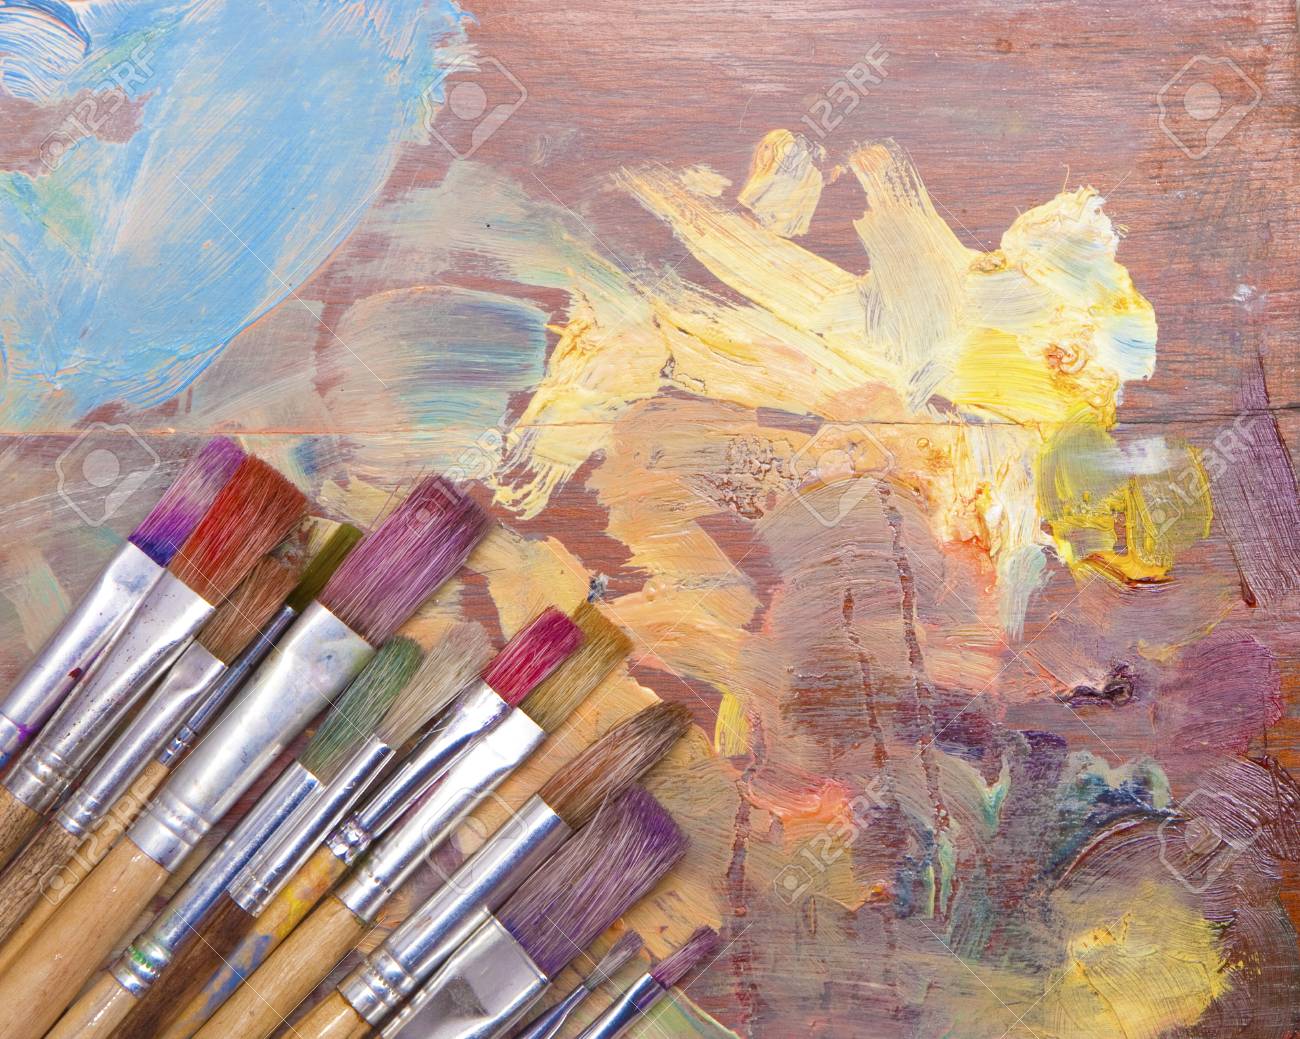 Used Artists Paint Brushes Different Colors On Palette Background